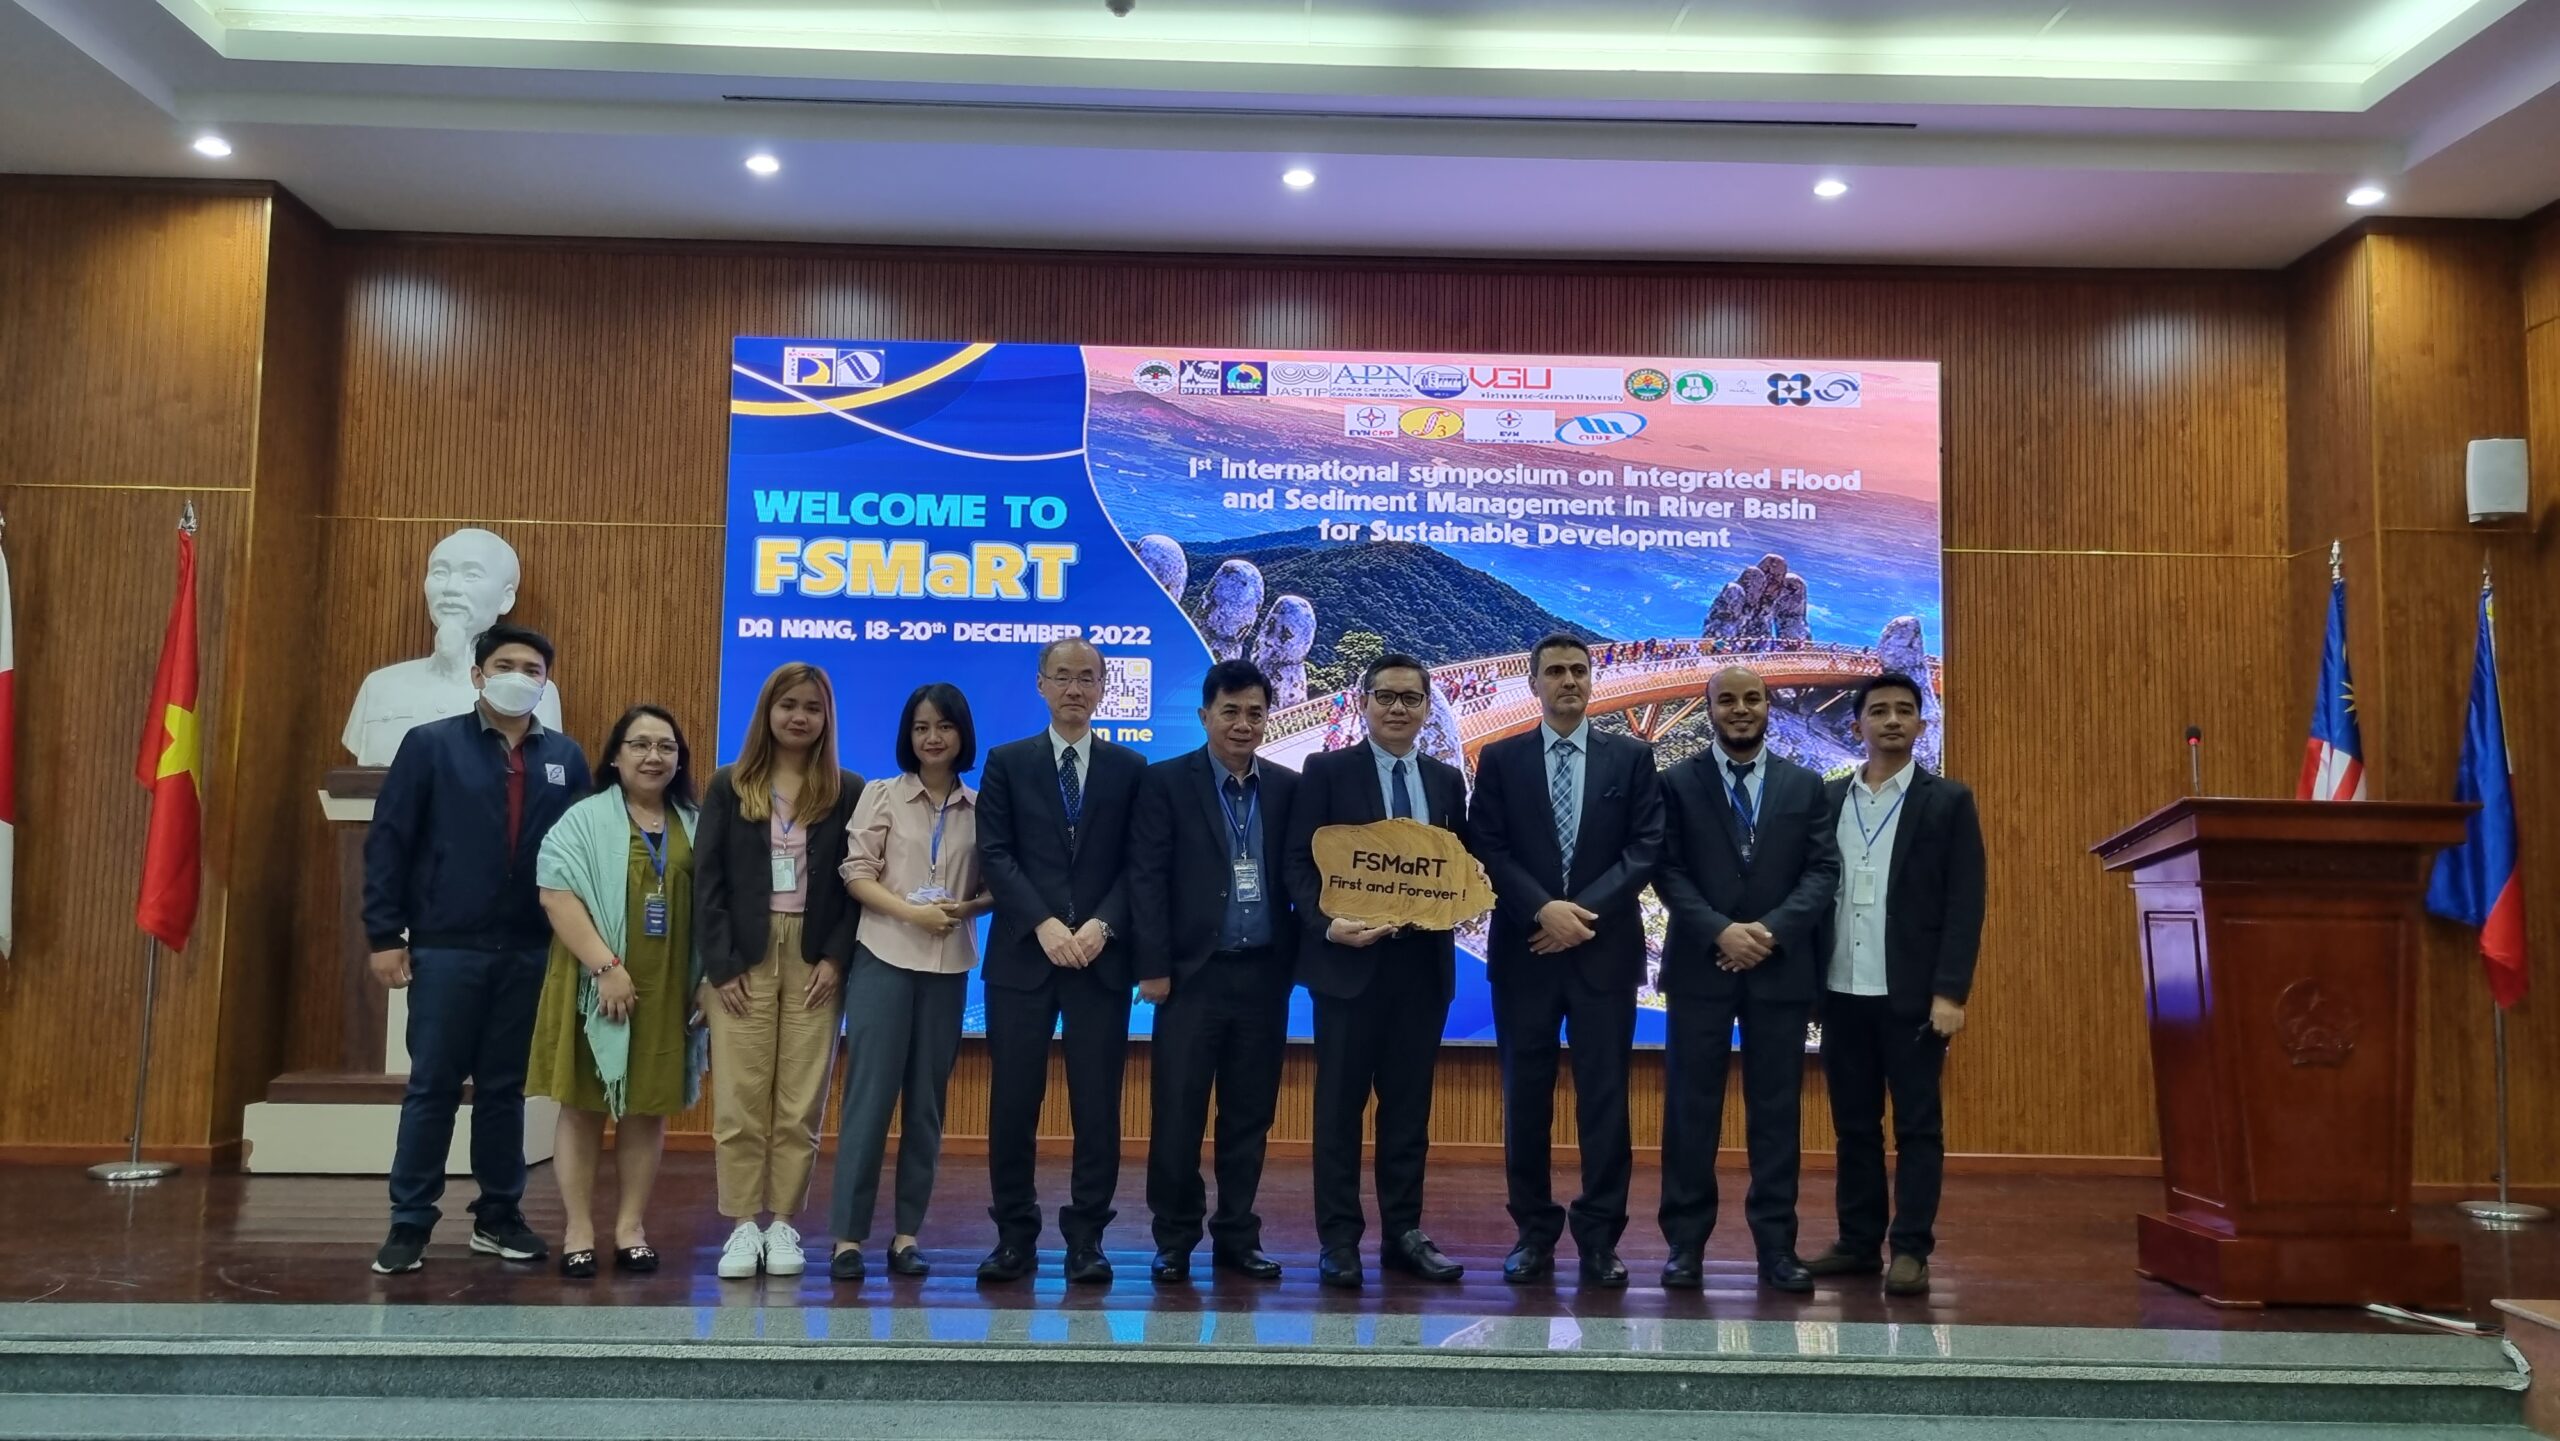 1st International Symposium on Integrated Flood and Sediment Management in River Basin for Sustainable Development (FSMART) 2022